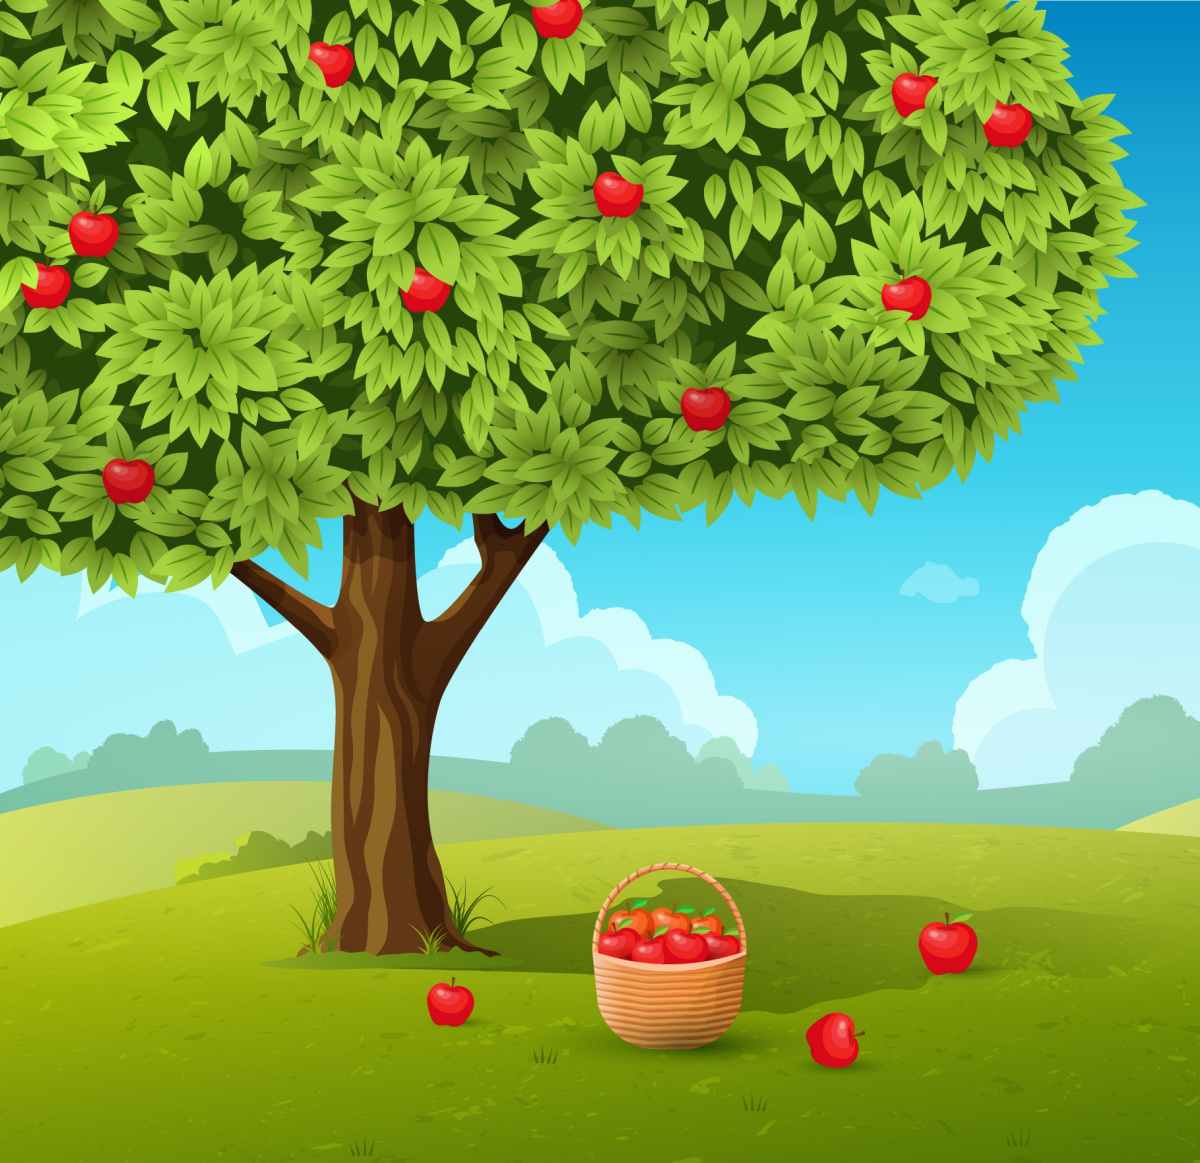 A cartoon apple tree with three apples on the ground and a basket of apples underneath it, with clouds and mountains in the background.